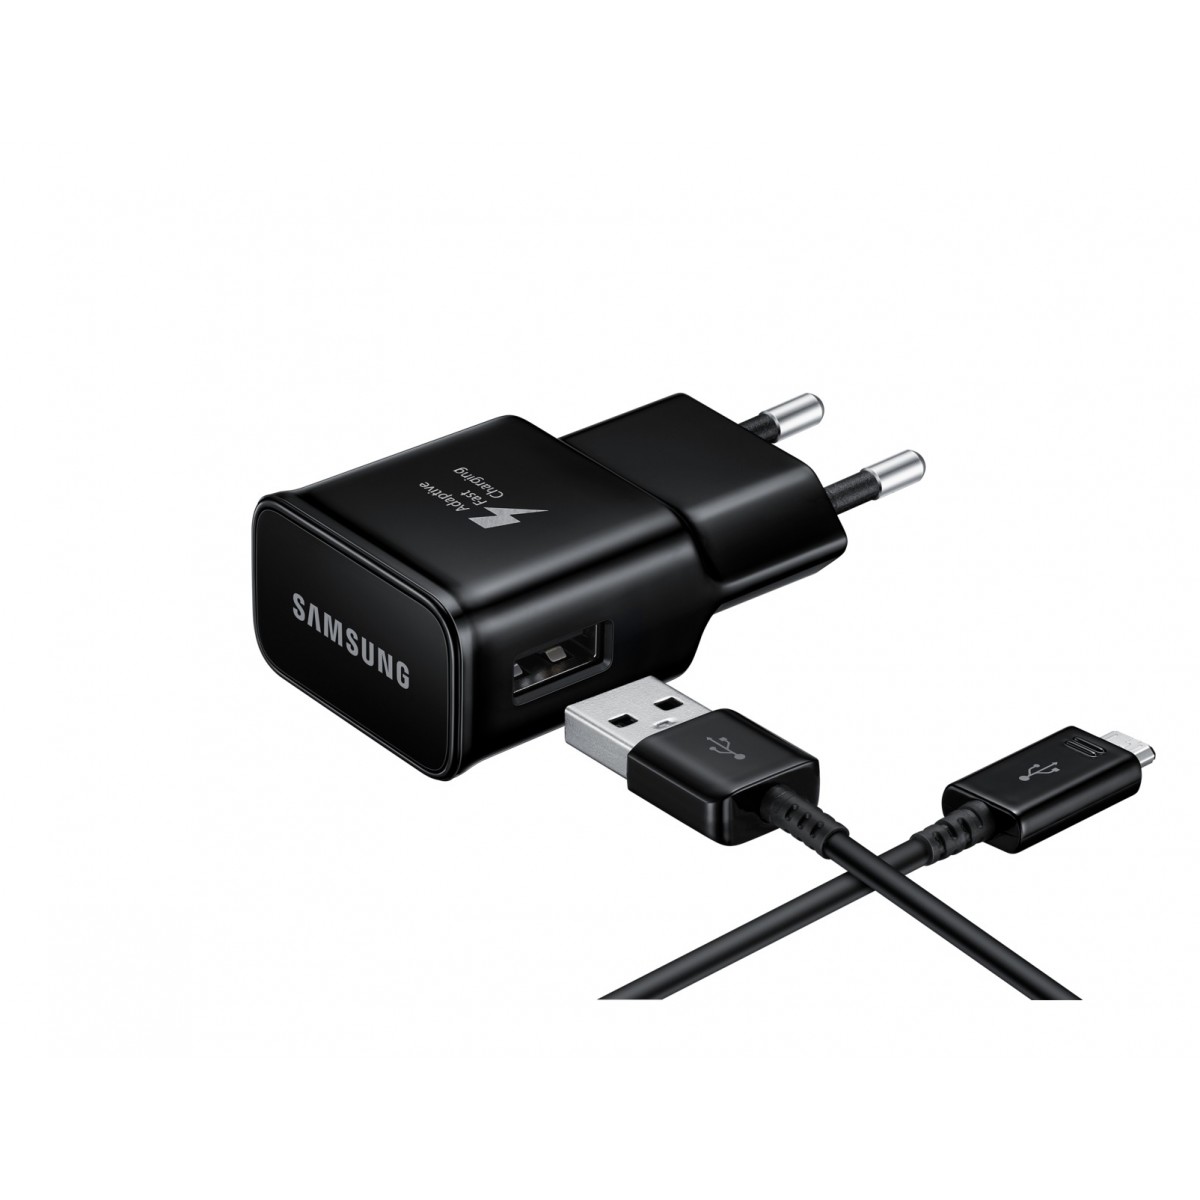 Samsung USB Type-C Cable & Wall Adapter Black (EP-TA20EBECGWW)